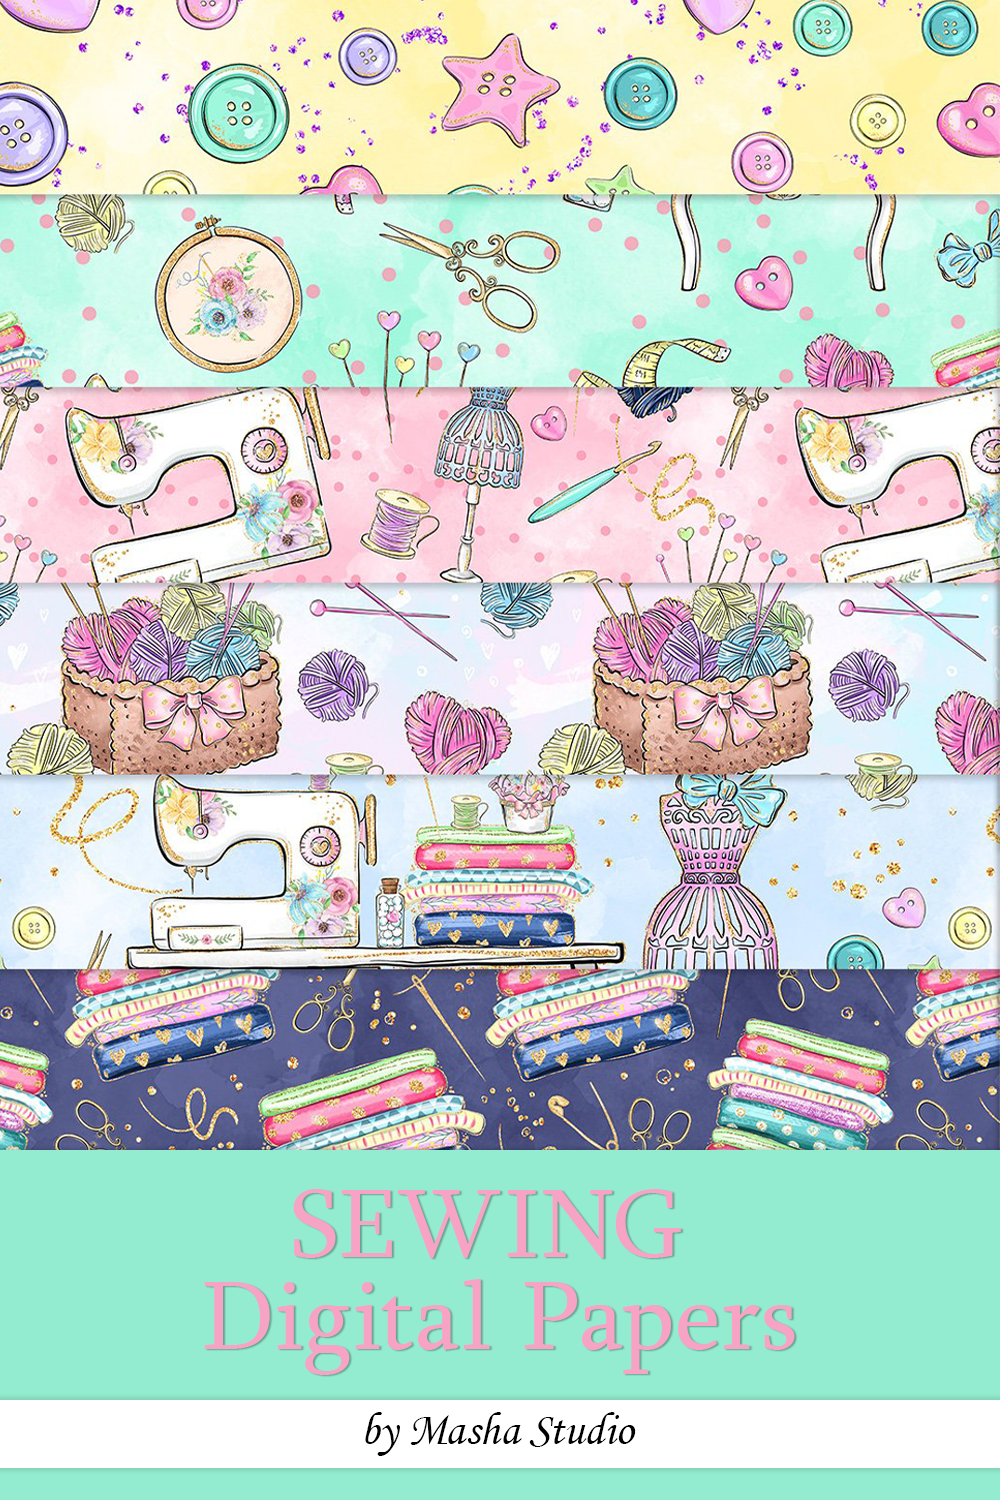 Sewing digital papers of pinterest.